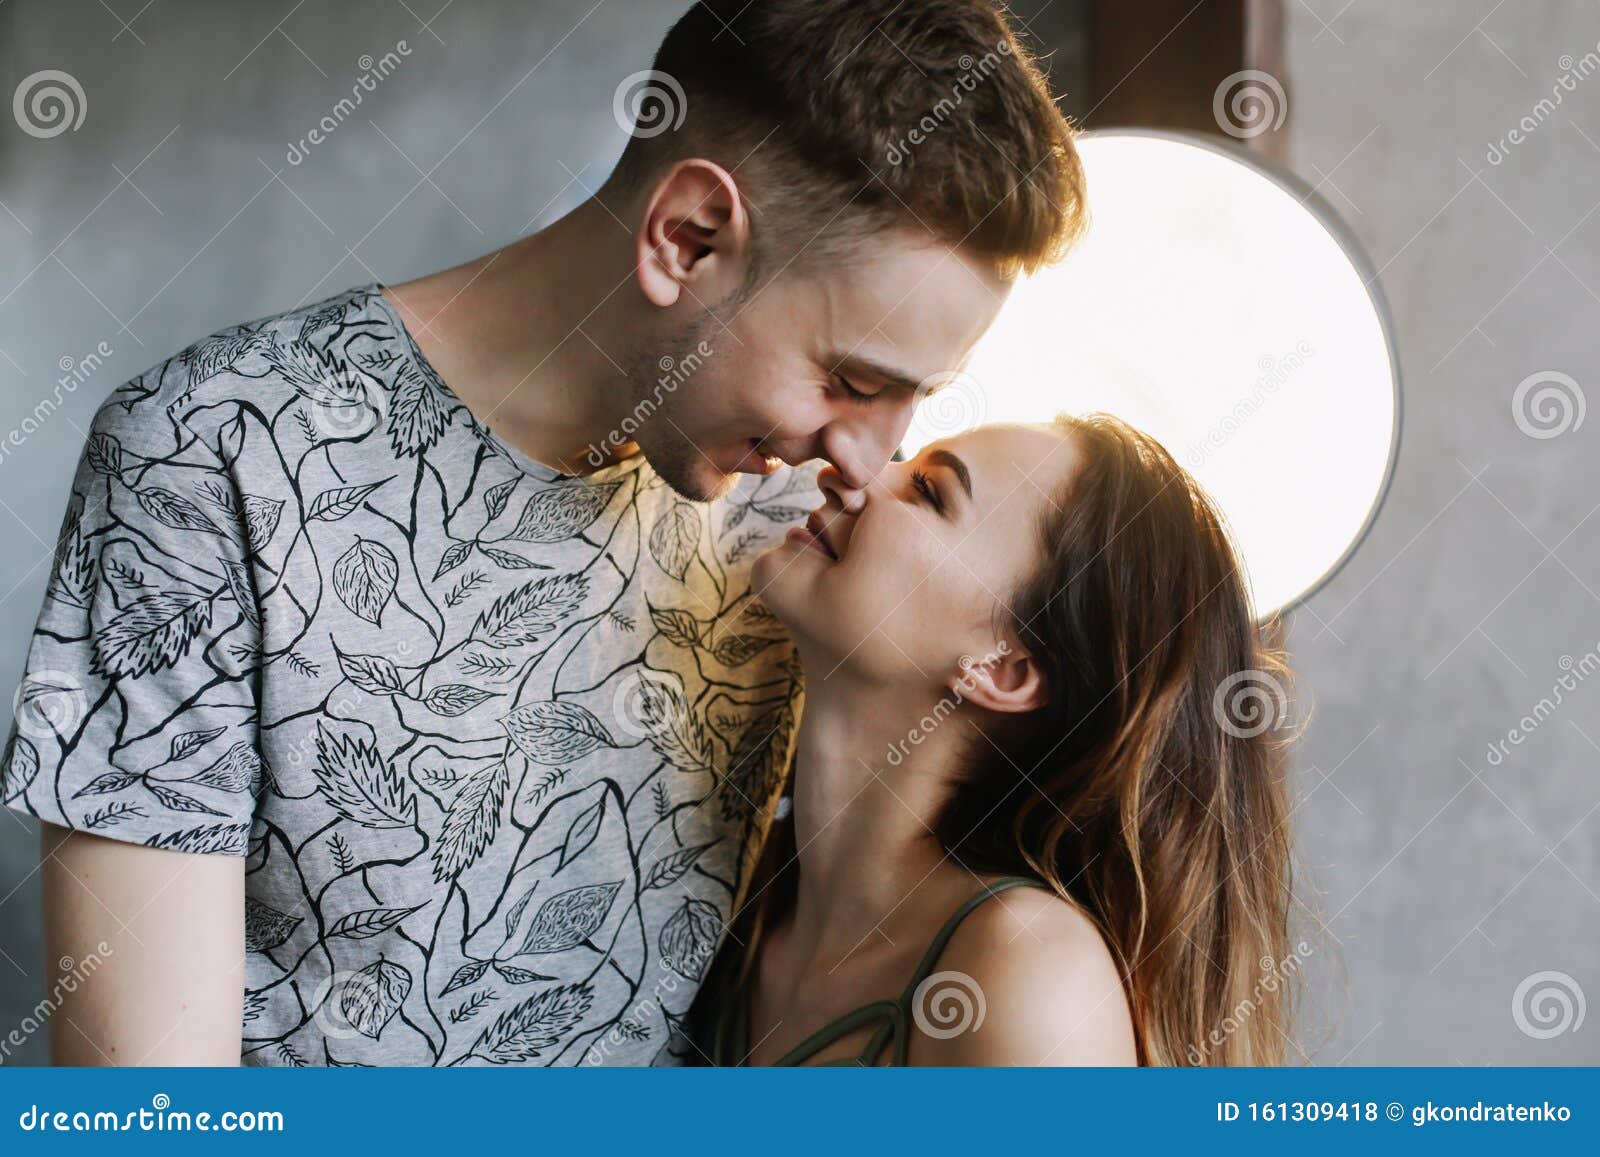 Kissing Couple Portrait. Young Couple Deeply in Love Sharing a ...